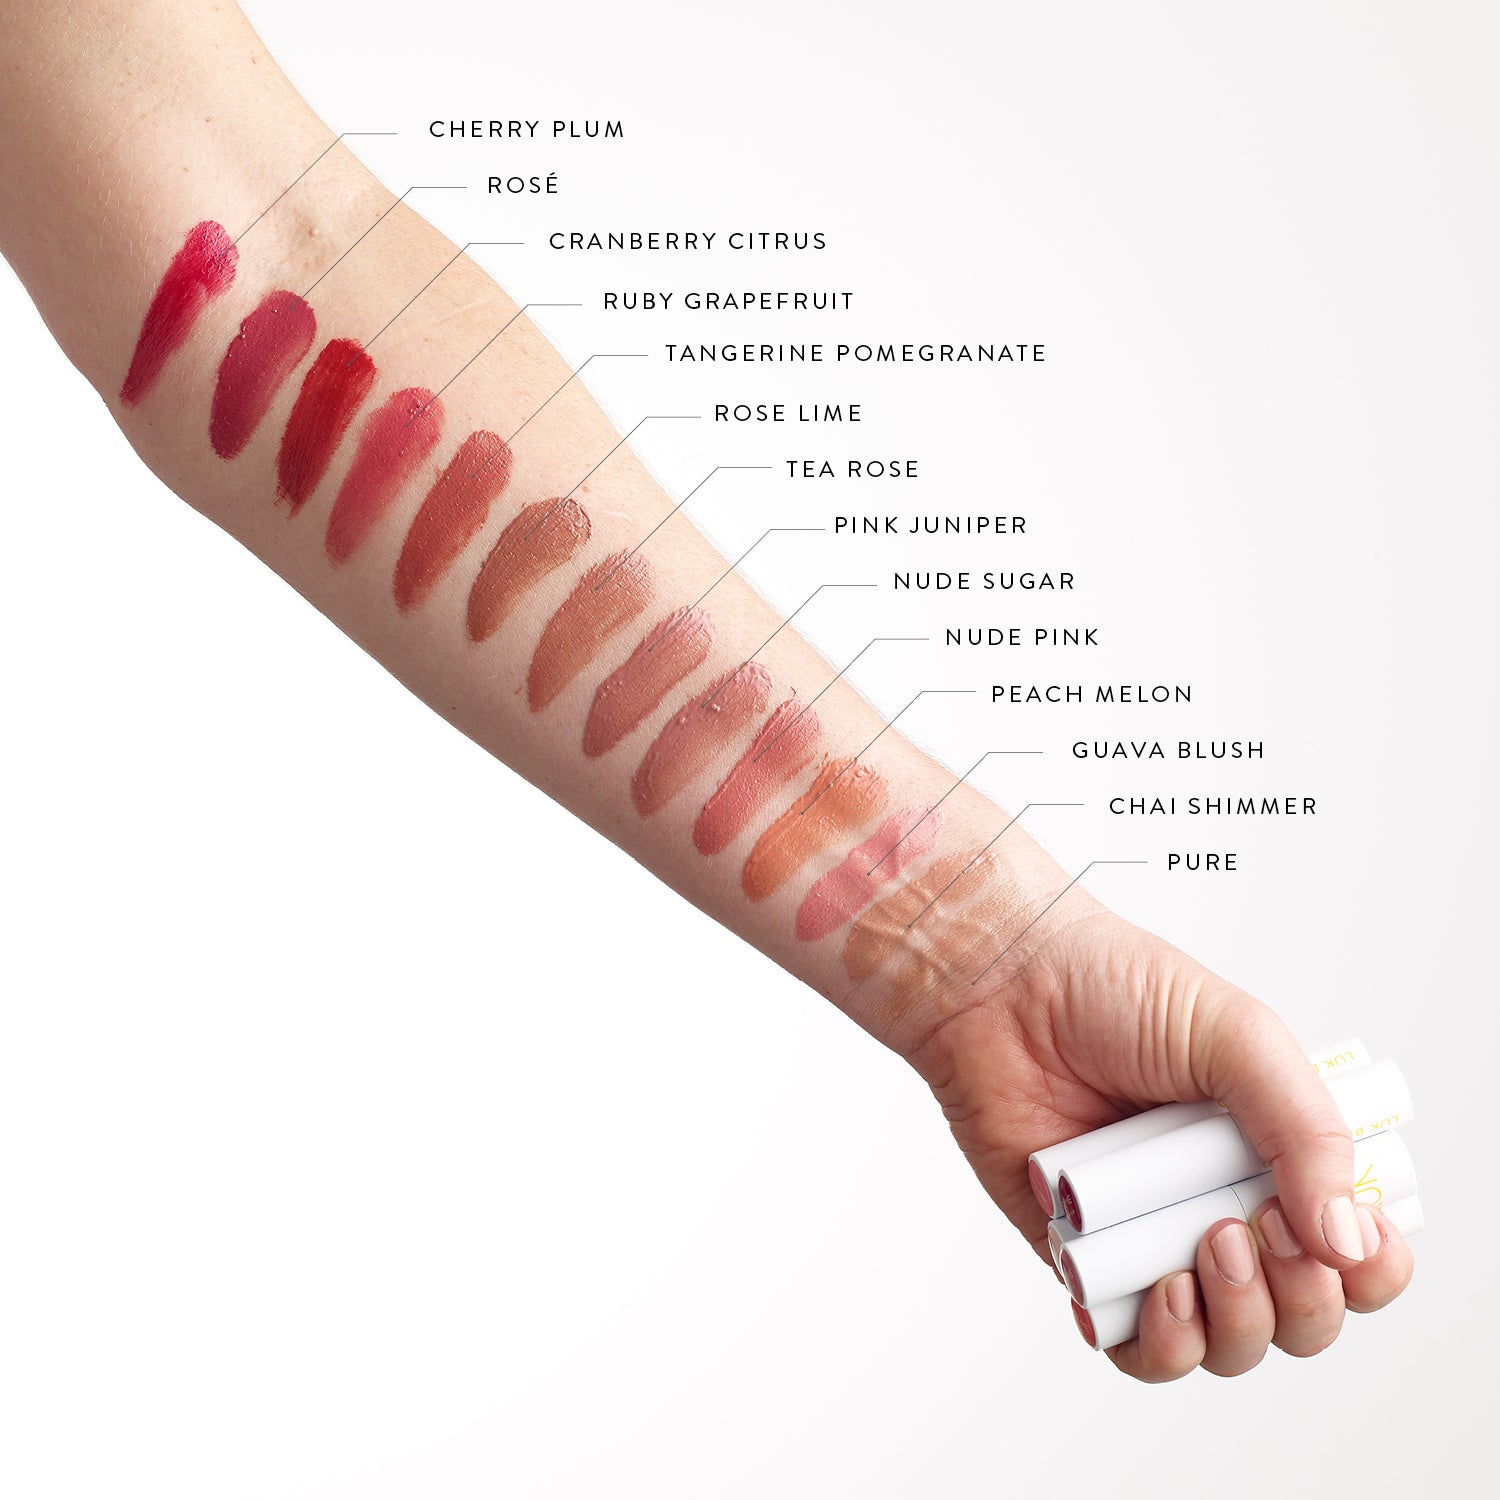 Lük Beautifood Lip Nourish Natural Lipstick in 14 sheer and buildable shades. Shade swatches on arm